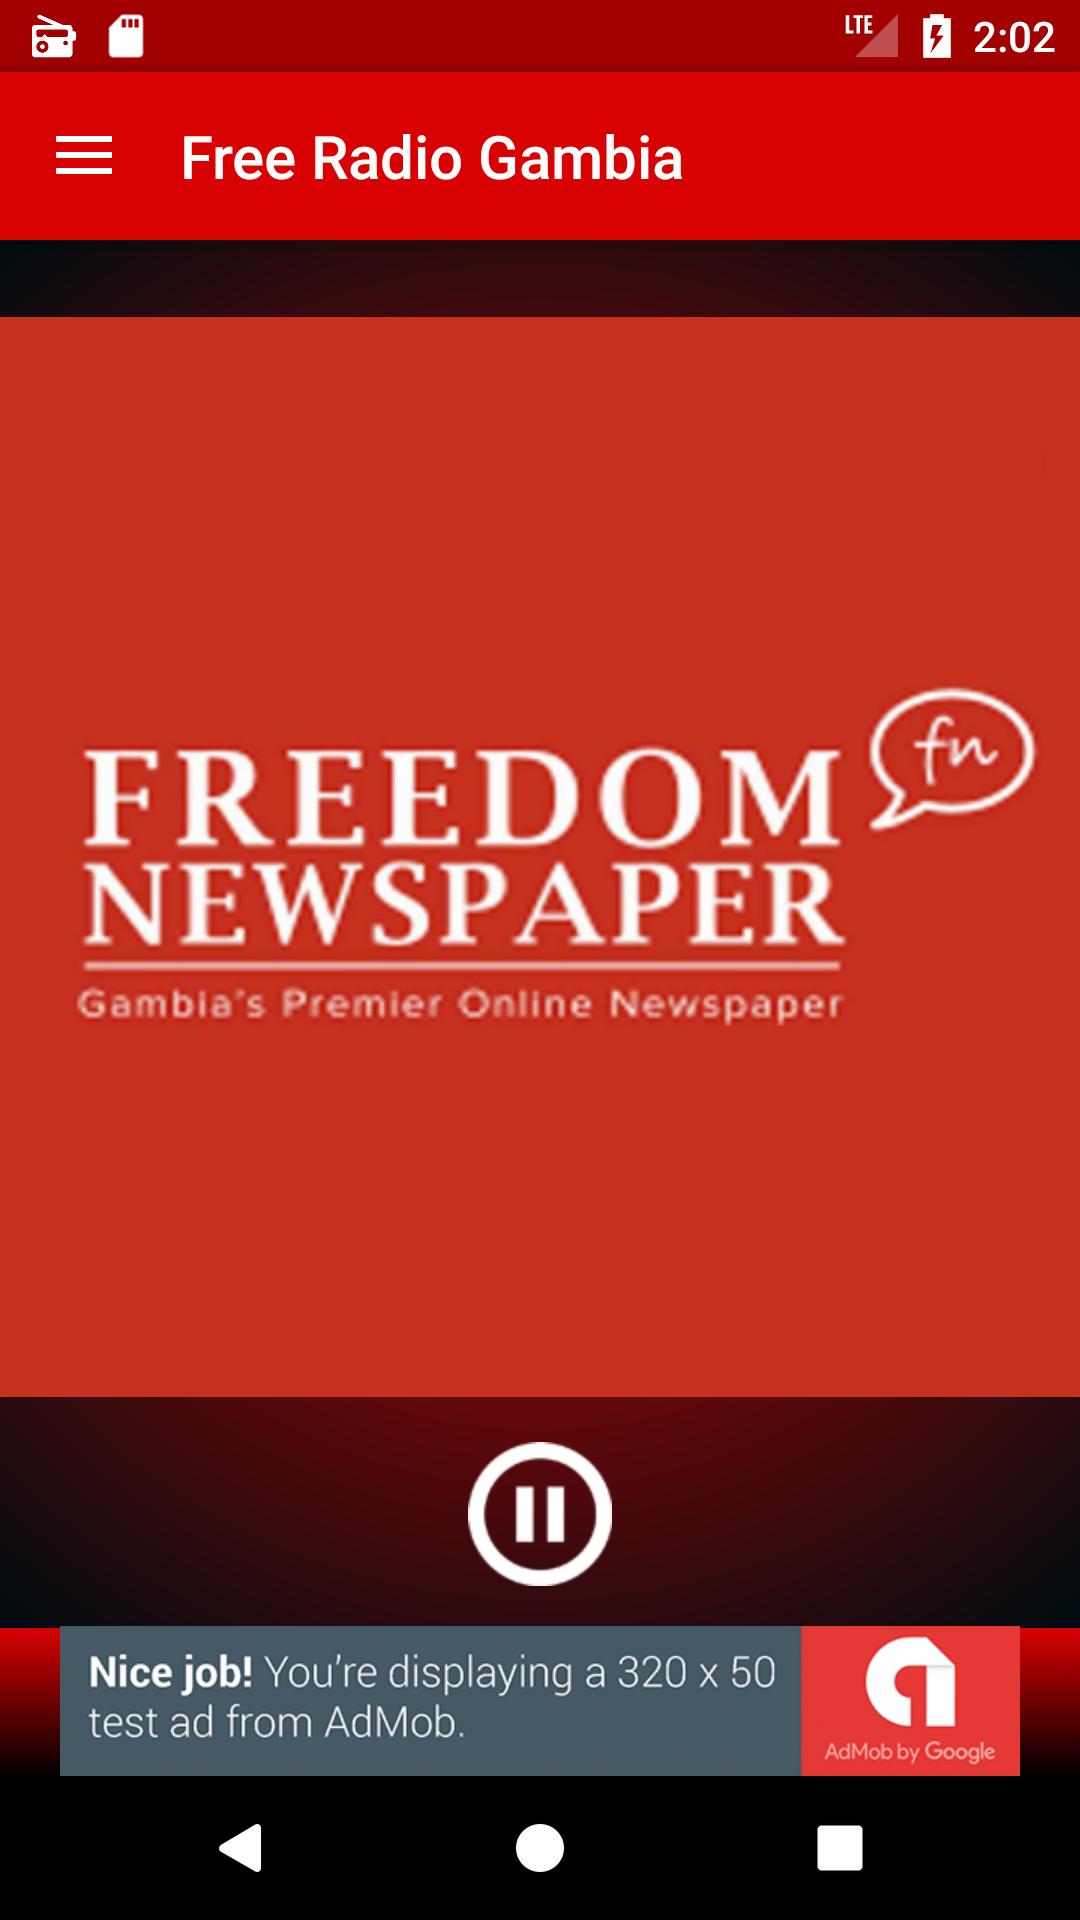 Freedom Radio Gambia for Android - APK Download